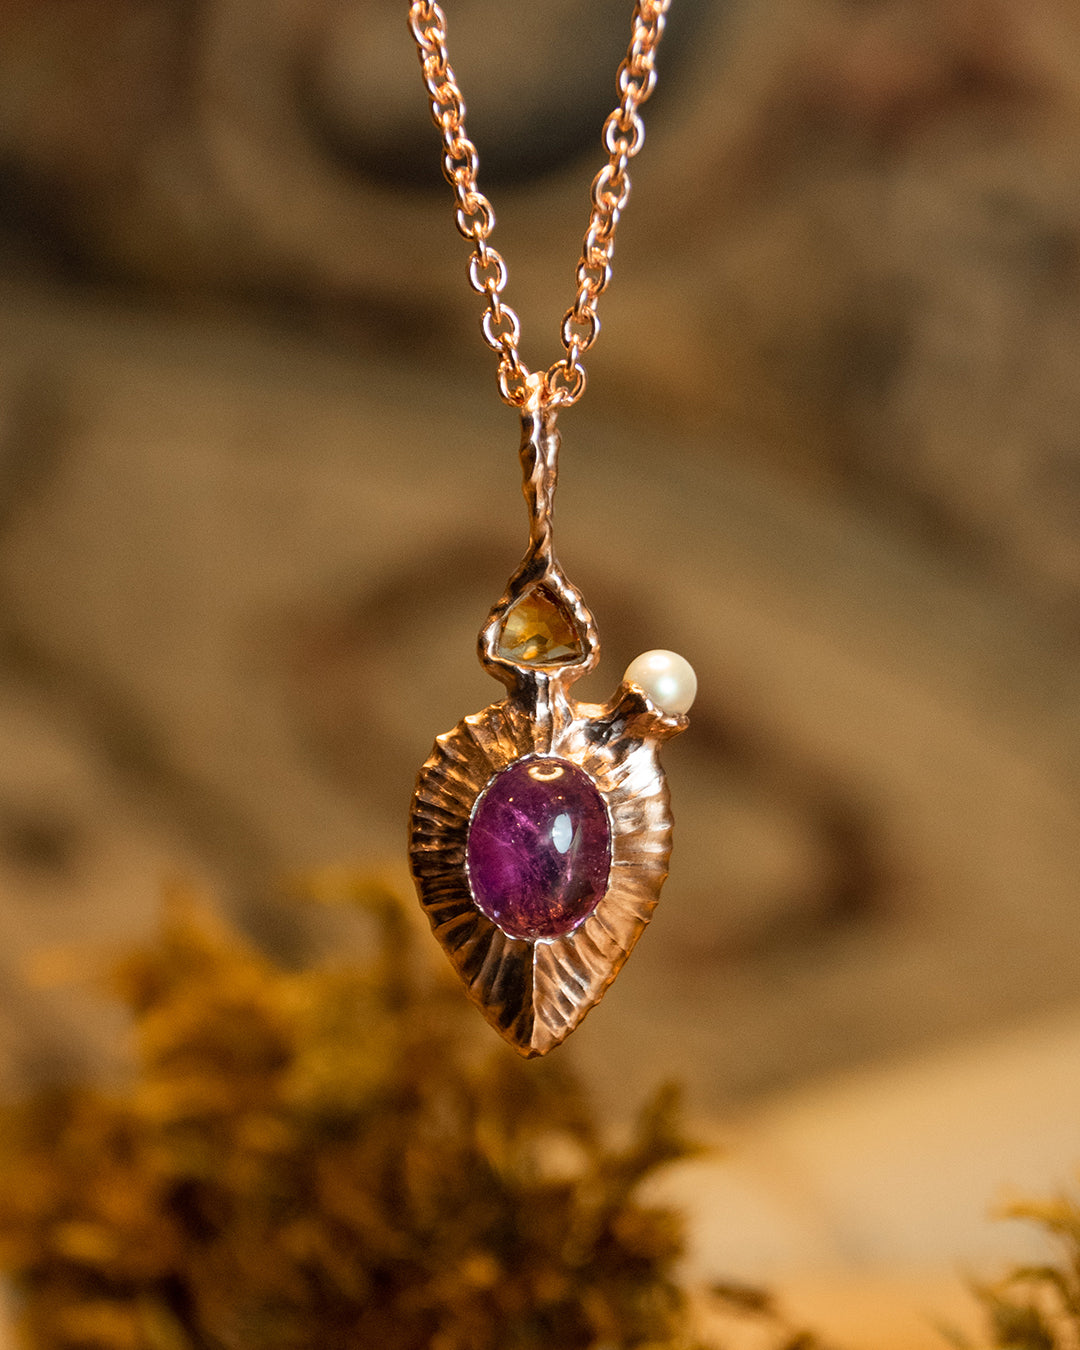 Photograph showing a Nisi Vessel Pendant on an 18K Rose Gold necklace chain